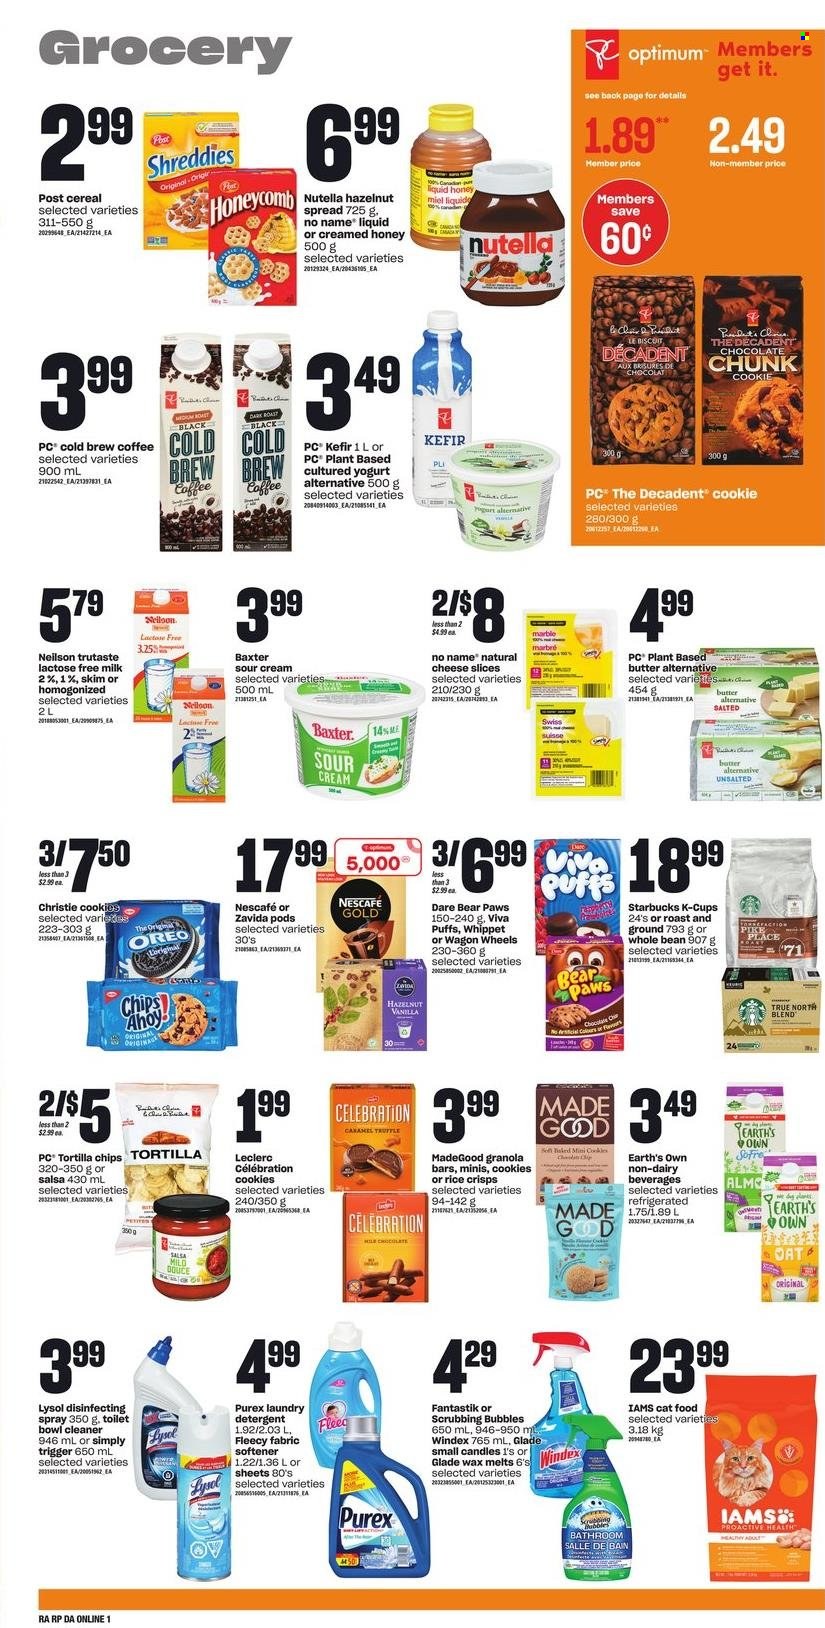 thumbnail - Dominion Flyer - June 30, 2022 - July 06, 2022 - Sales products - puffs, No Name, sliced cheese, cheese, yoghurt, milk, Milo, lactose free milk, kefir, butter, sour cream, cookies, chocolate, truffles, Celebration, tortilla chips, chips, rice crisps, cereals, granola bar, rice, salsa, honey, hazelnut spread, Coca-Cola, coffee, coffee capsules, Starbucks, K-Cups, Windex, Scrubbing Bubbles, cleaner, Lysol, fabric softener, laundry detergent, Purex, candle, Glade, animal food, Paws, cat food, Optimum, Iams, wagon, detergent, Nutella, Oreo, Nescafé. Page 5.